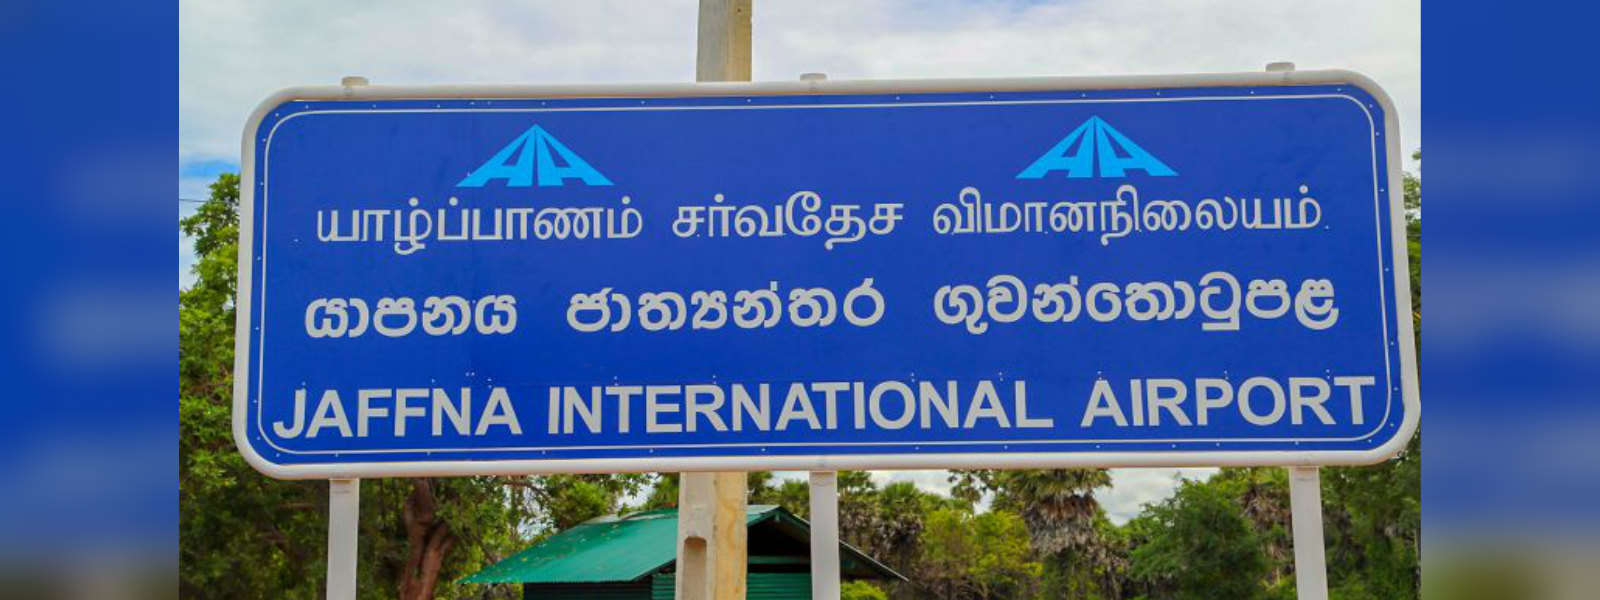 Commercial flights from Jaffna to India from the 10th : CAA